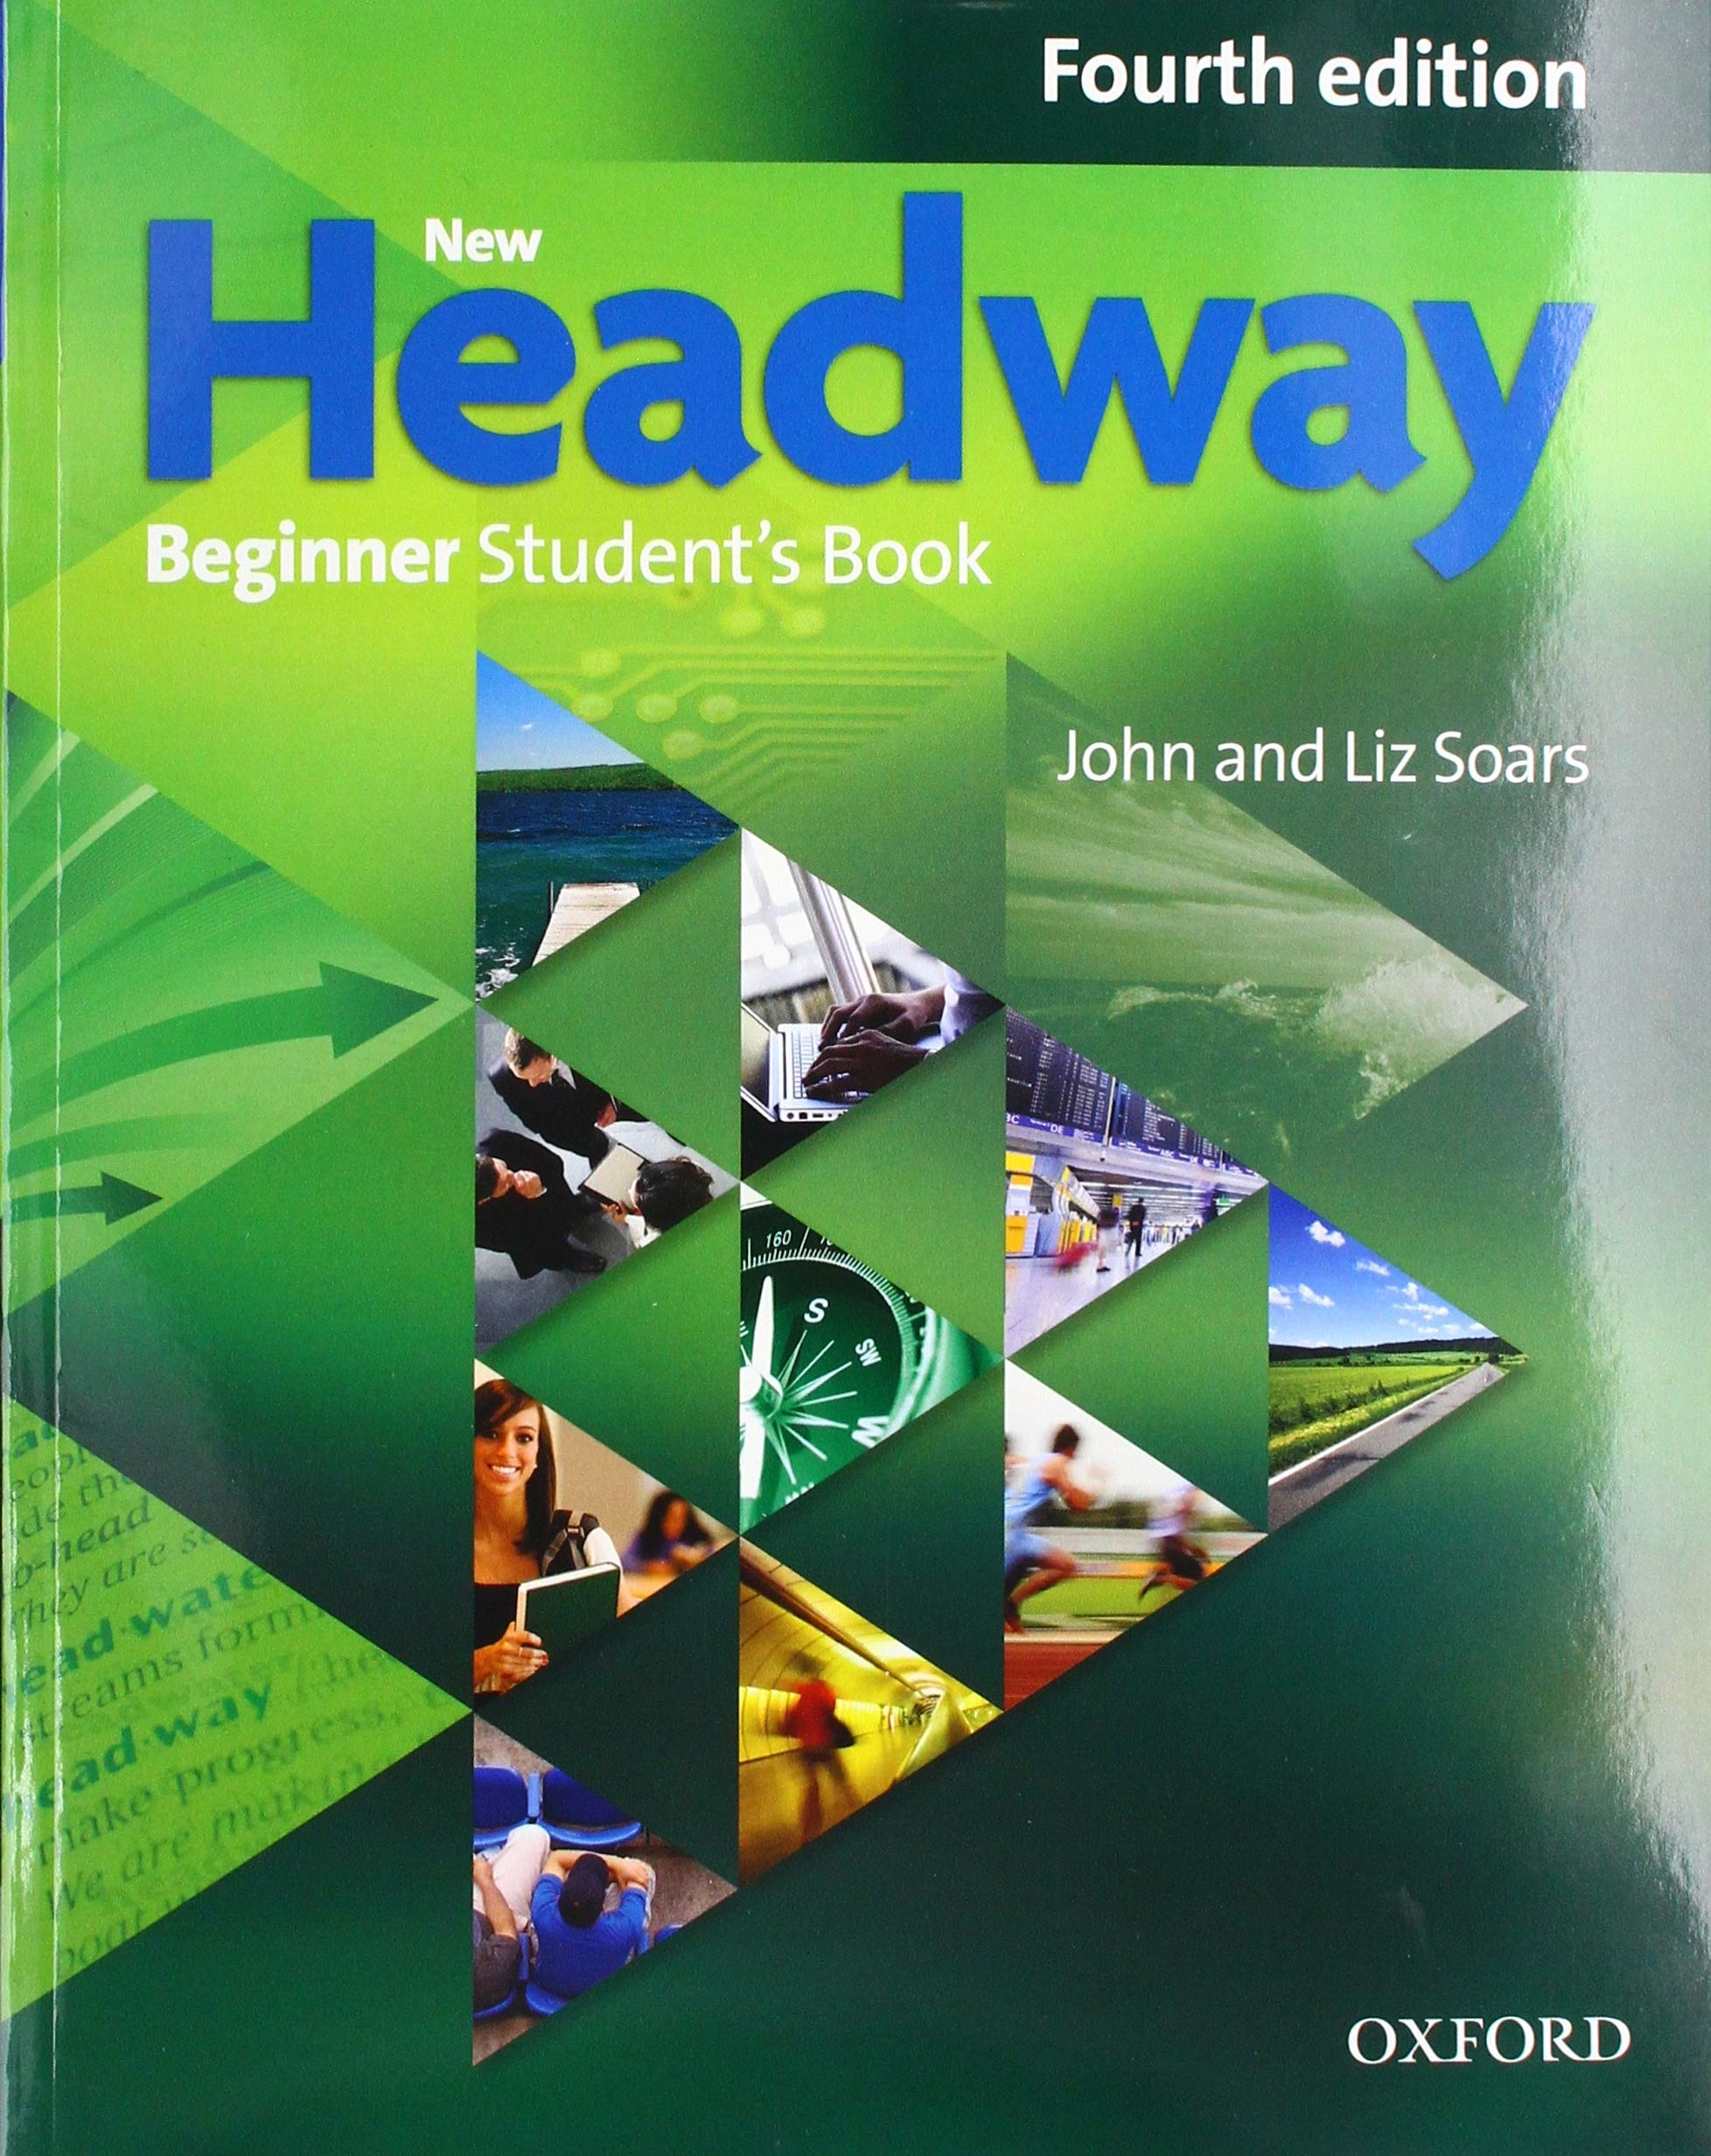 NEW HEADWAY BEGINNER 4th ED Student's Book